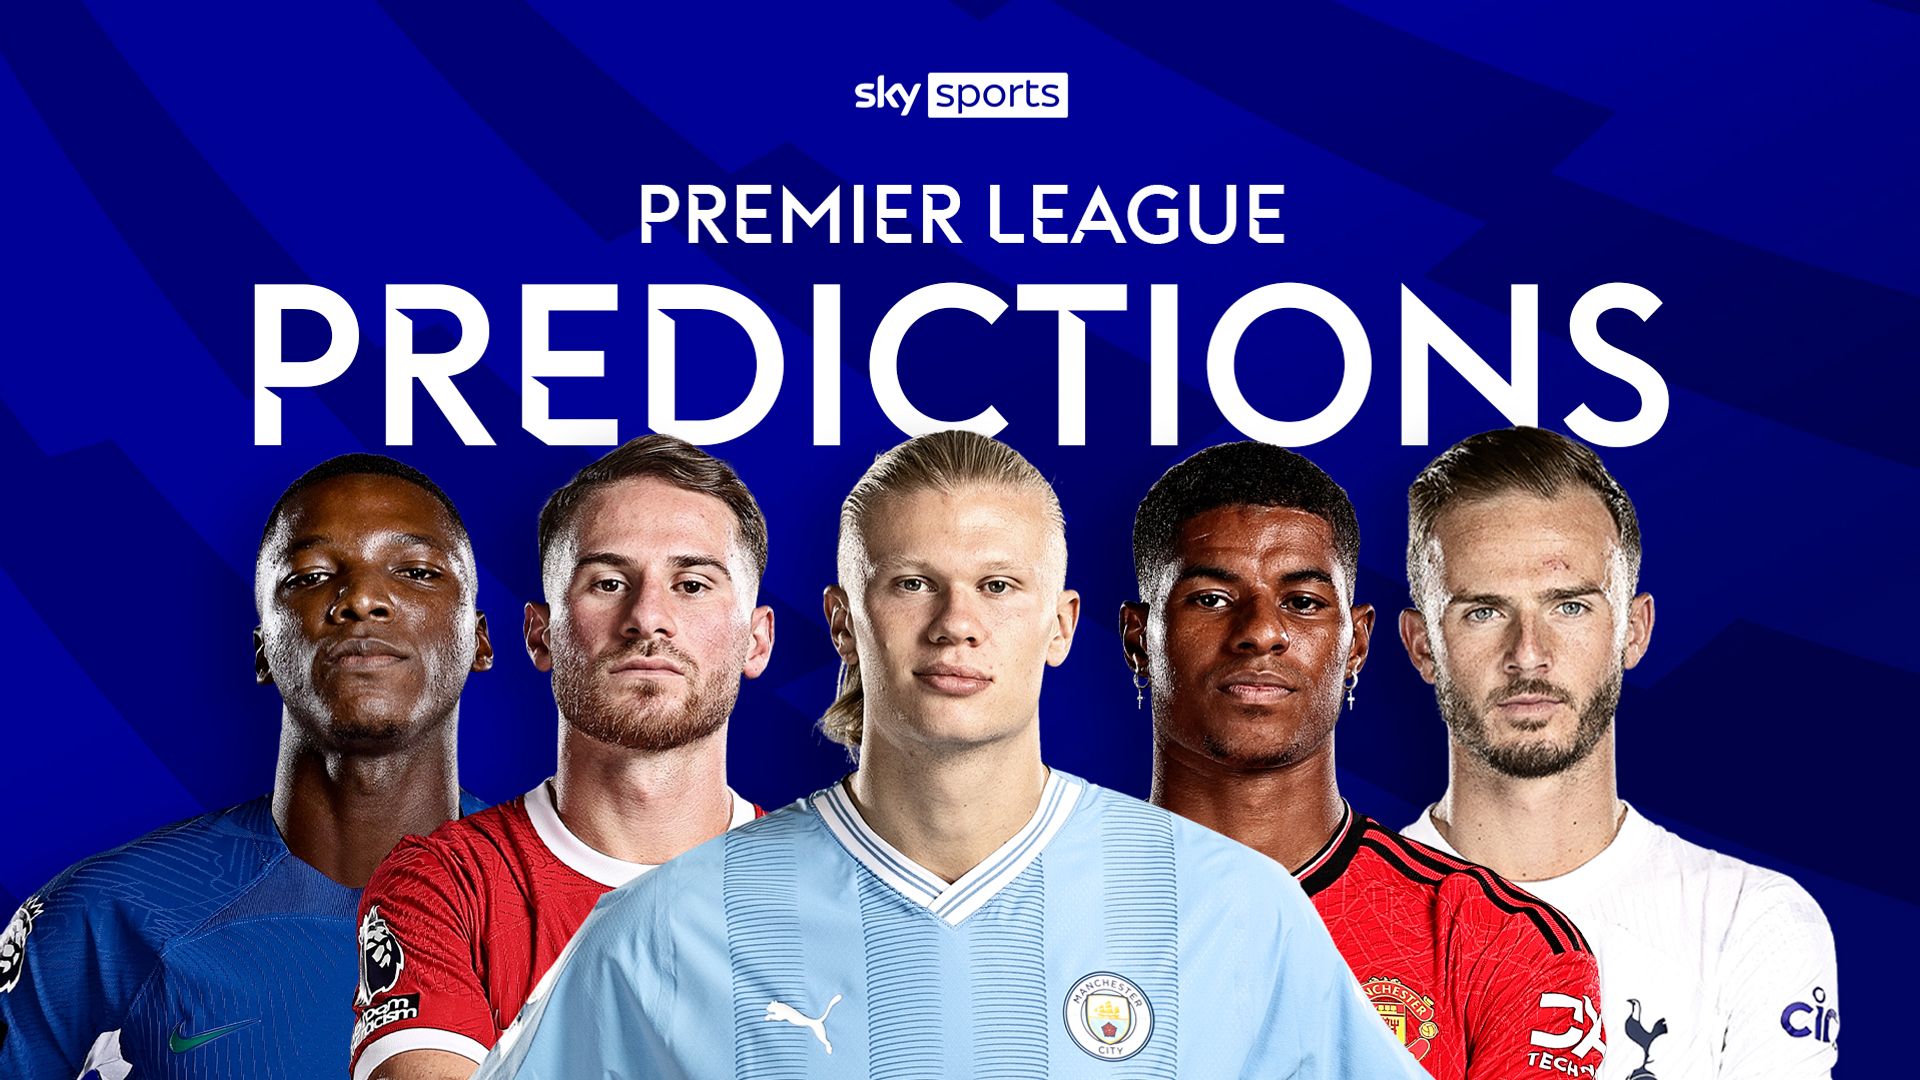 PL Predictions: More misery for Man Utd, no stopping Arsenal